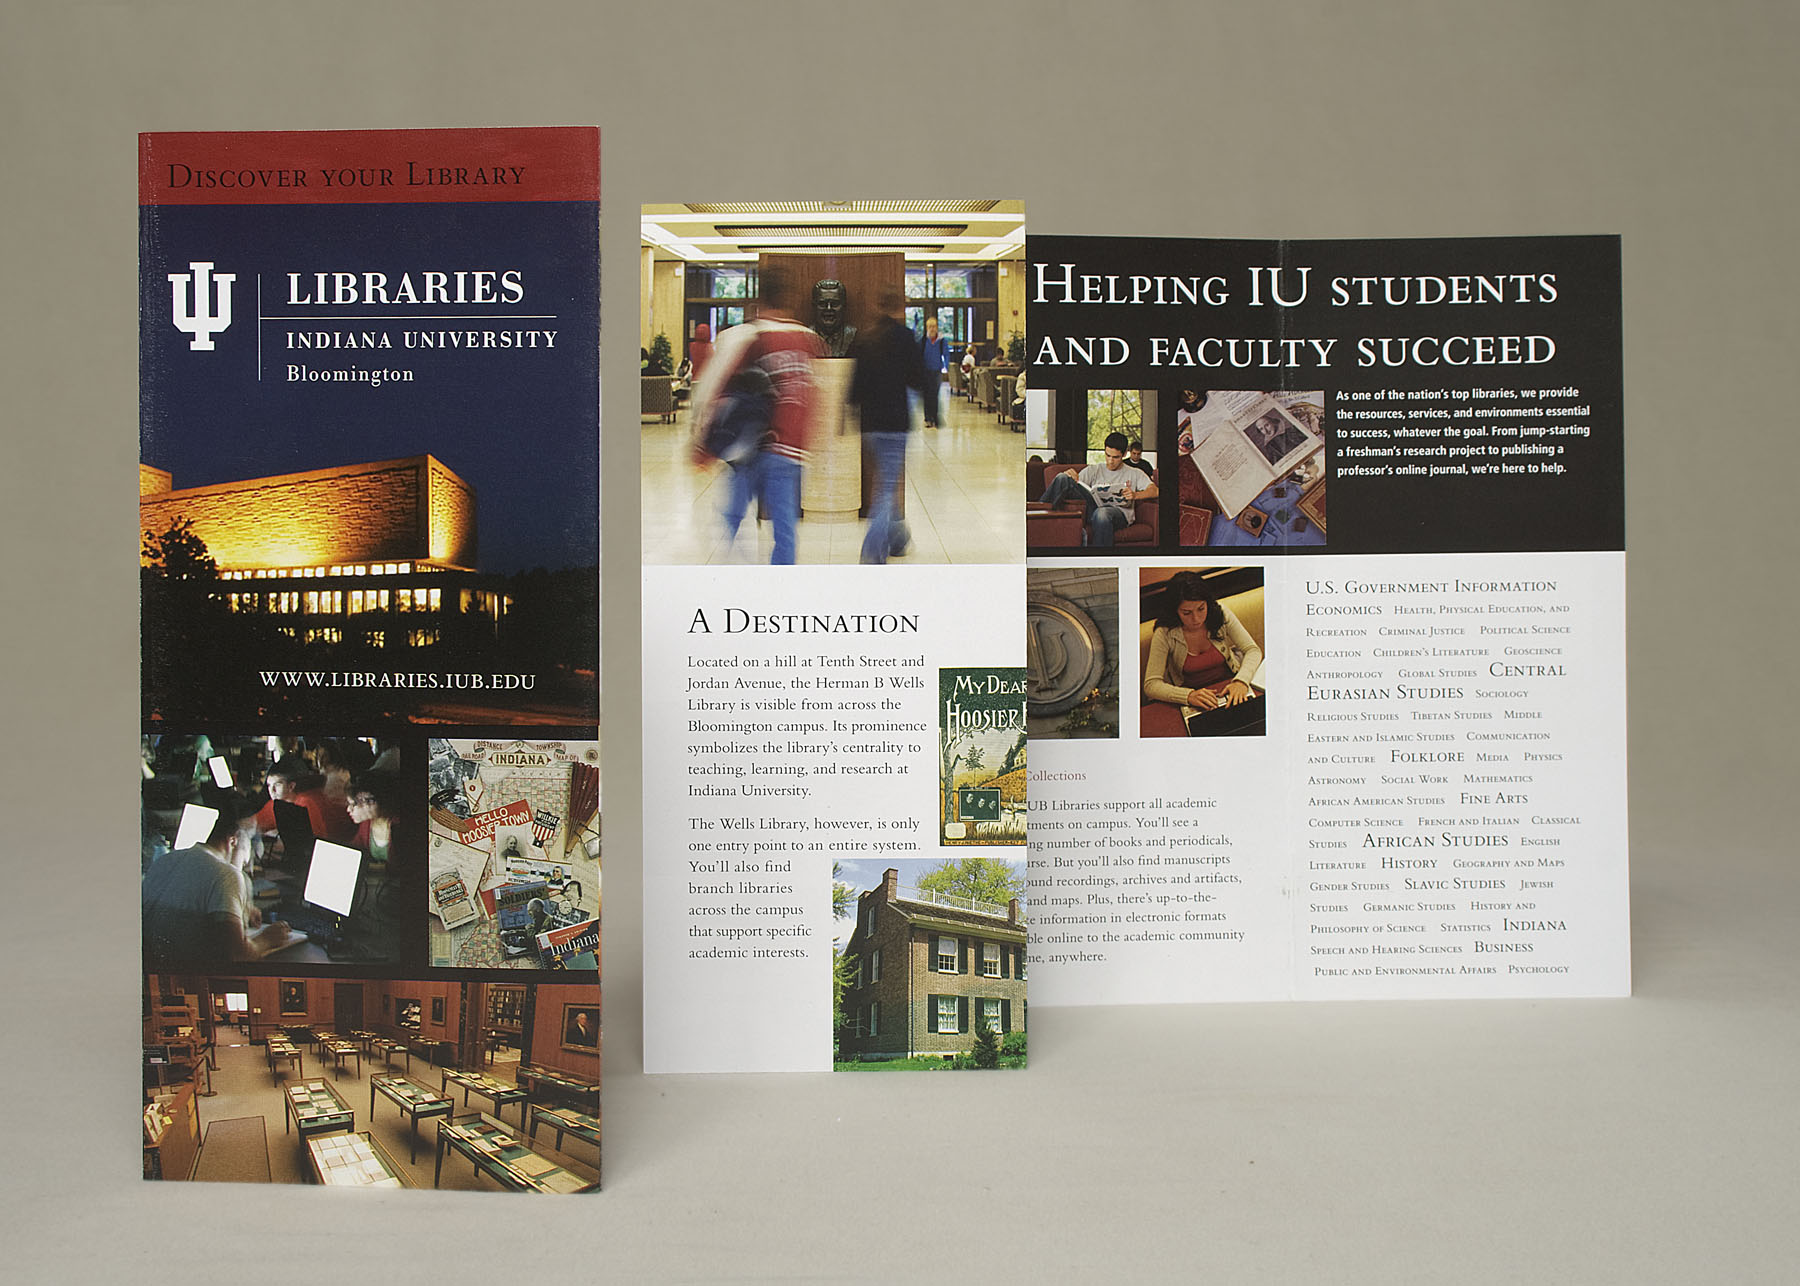 IUB LIBRARIES: Discover Your Library